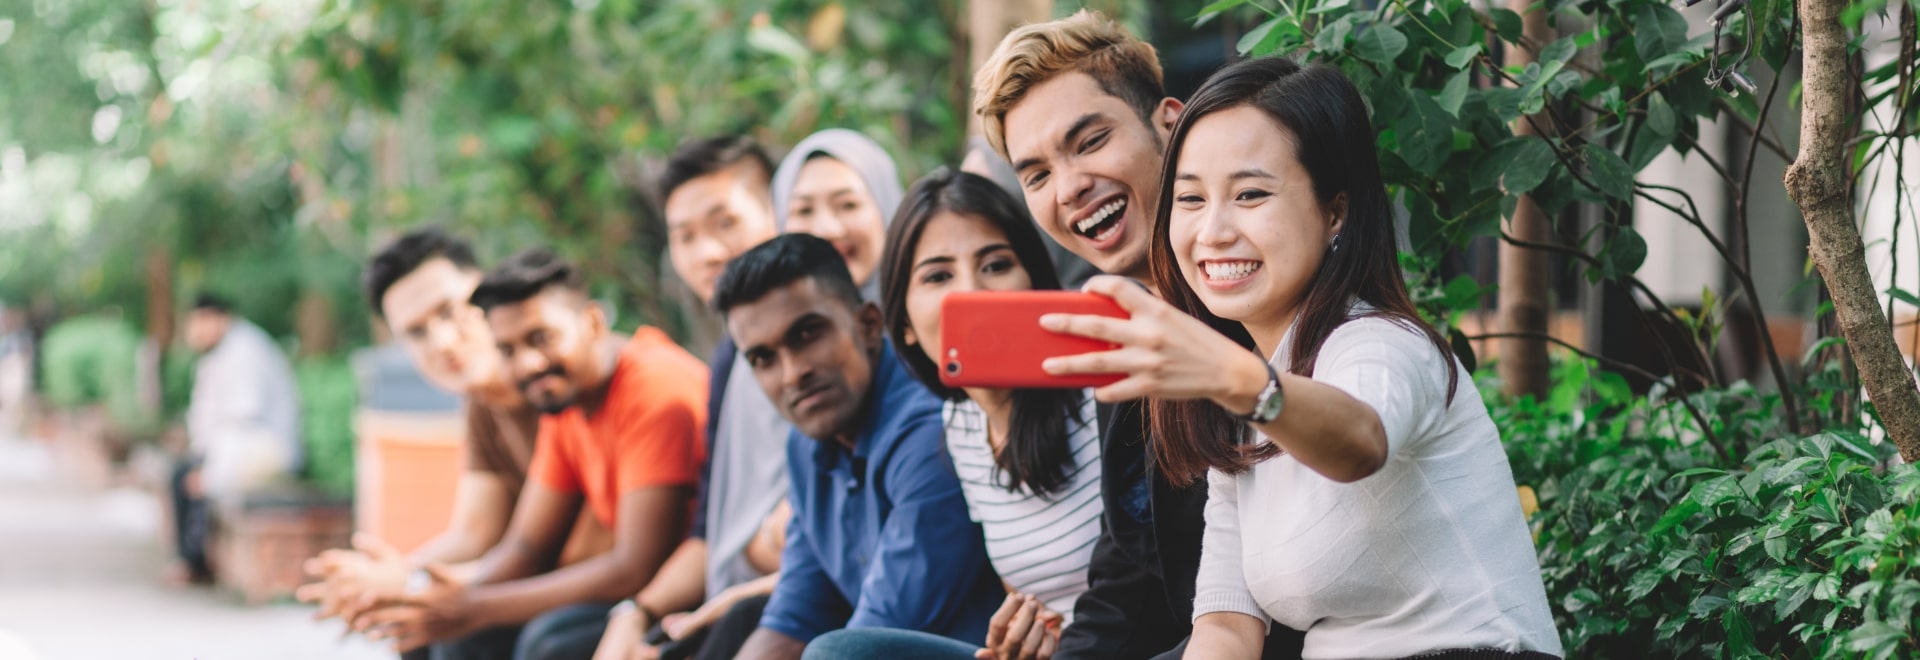 group of students in a line taking a selfie